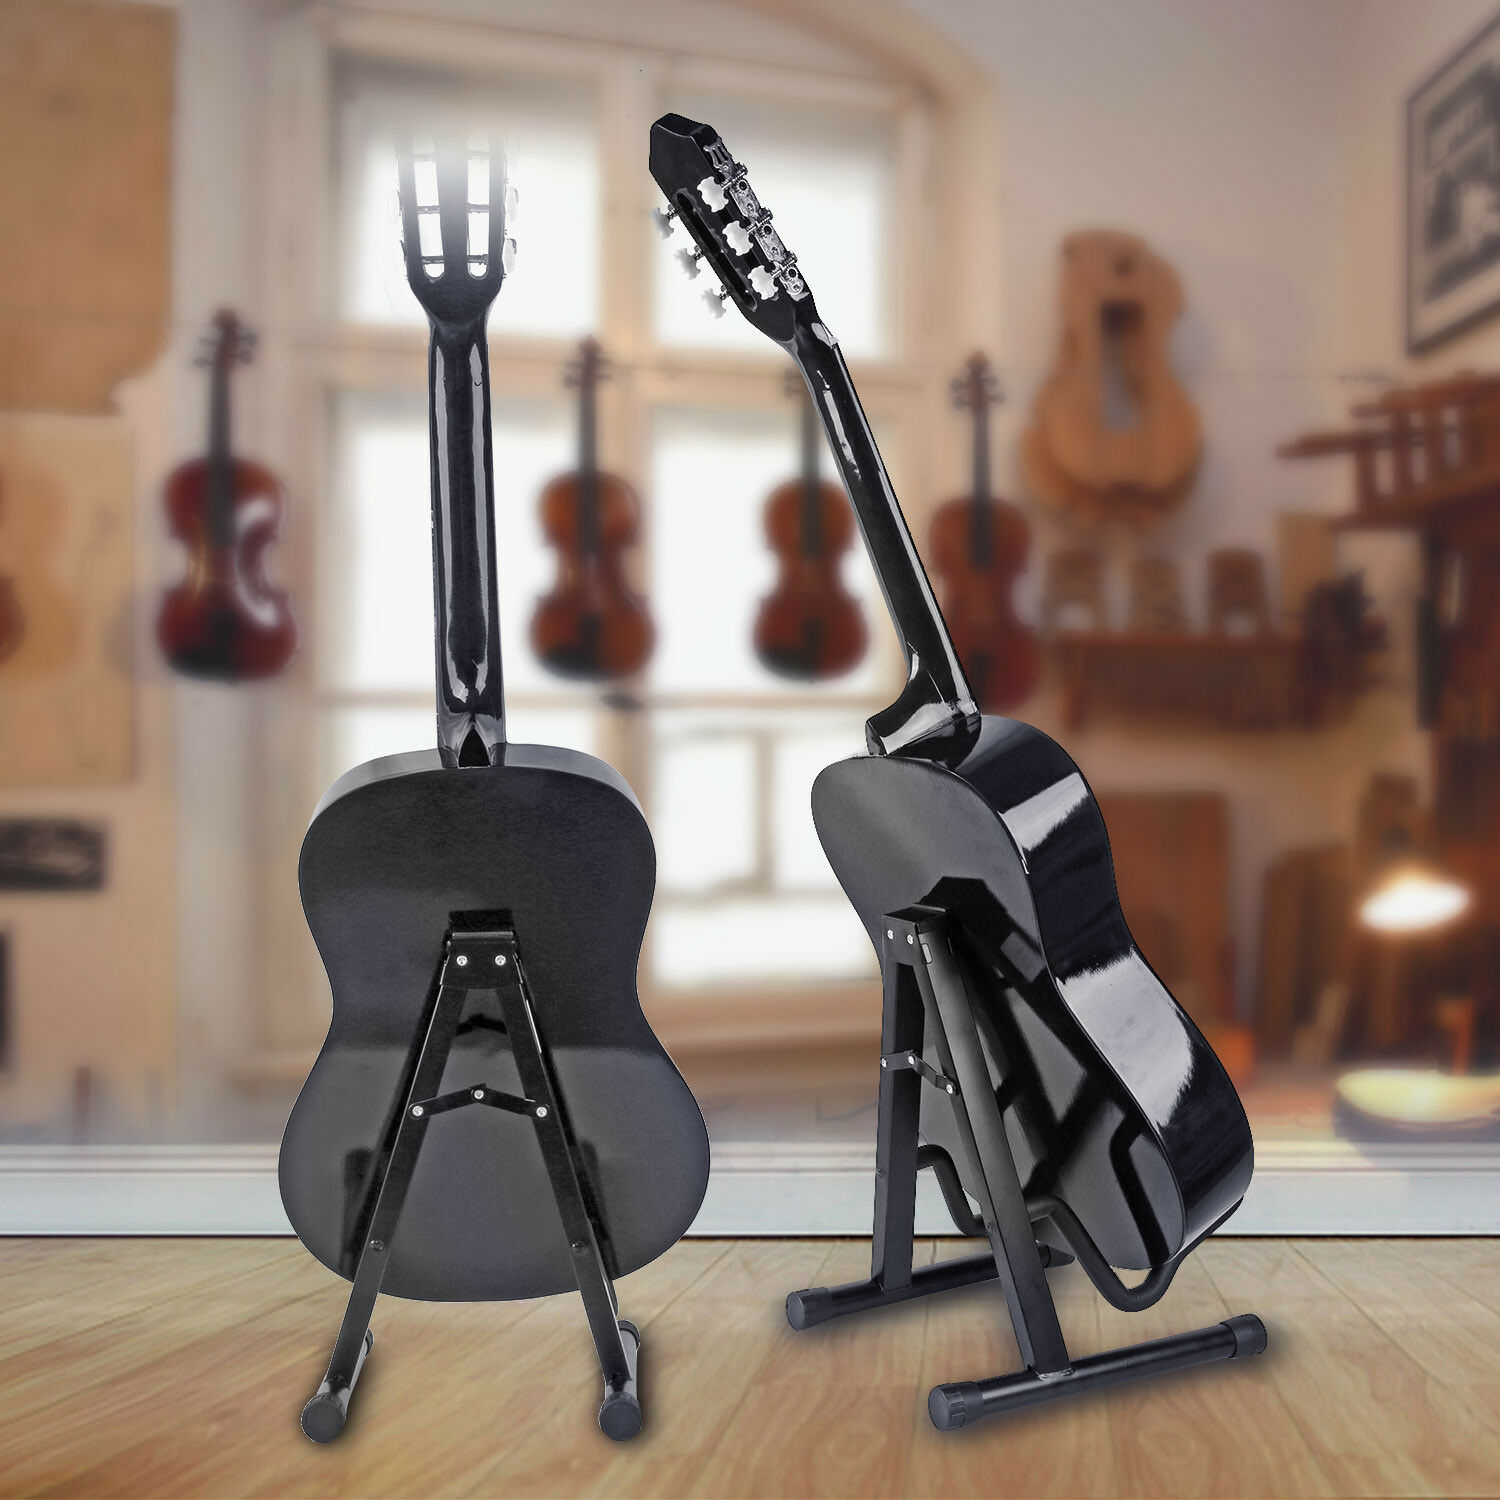 Universal A-frame Guitar Stand Fits All Guitars Acoustic Electric Bass Foldable